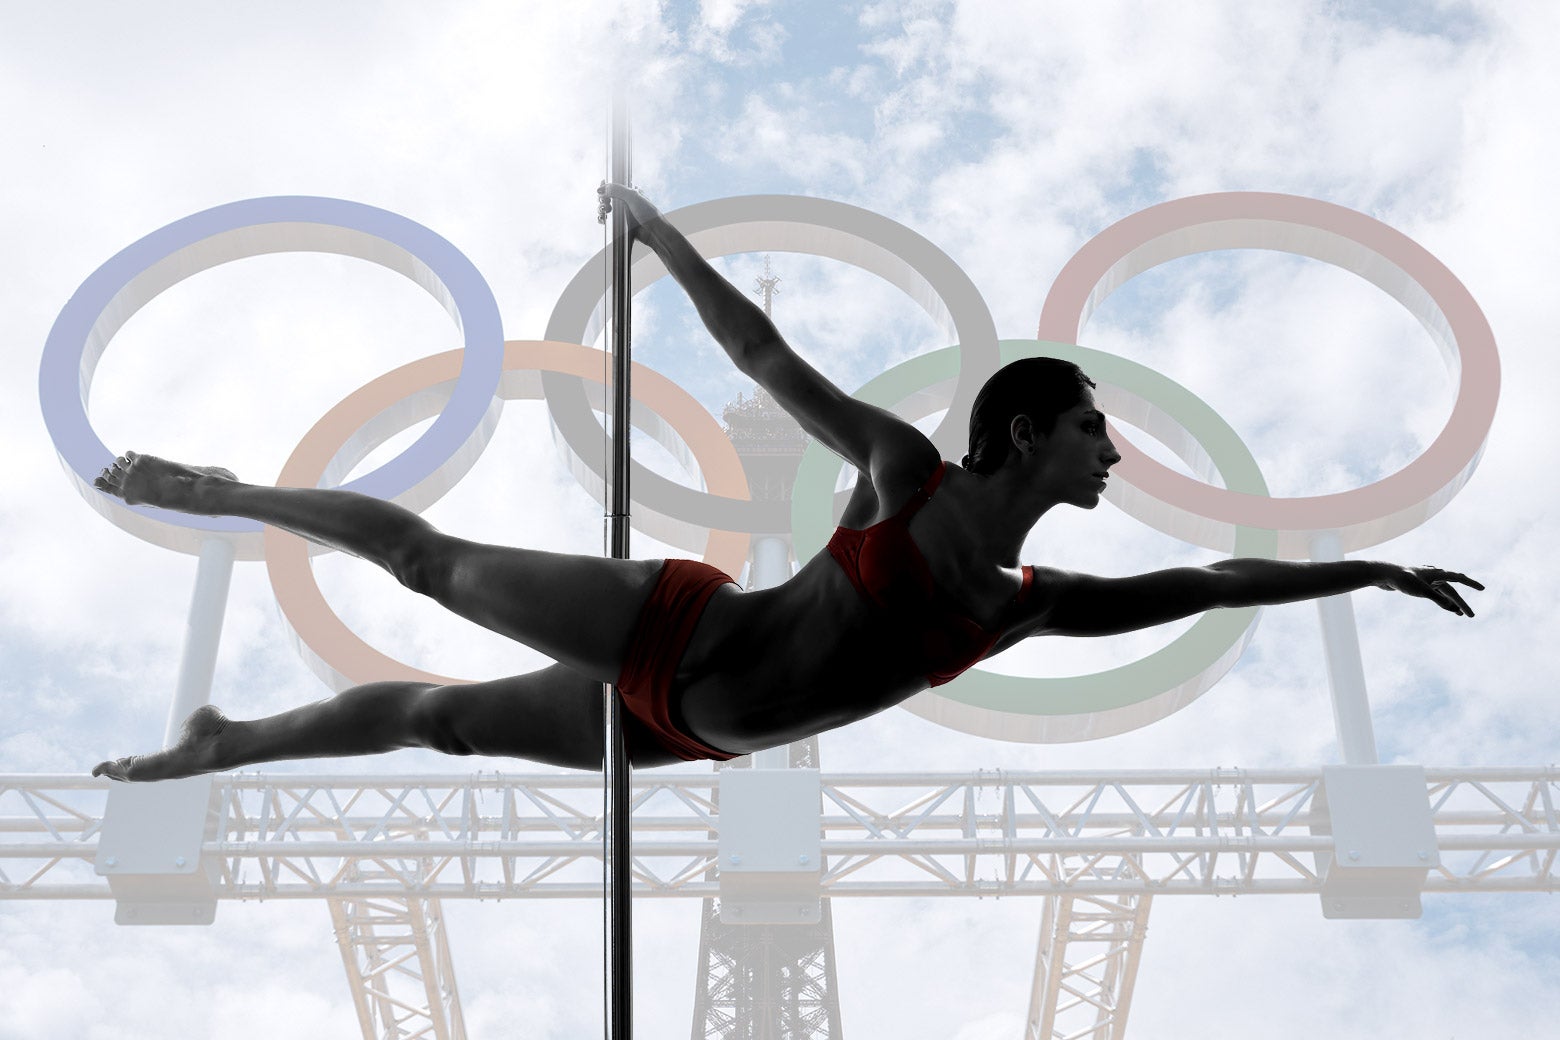 The Competitive, Athletic, Hugely Popular Sport That the Olympics Won’t Touch With a 10-Foot Pole